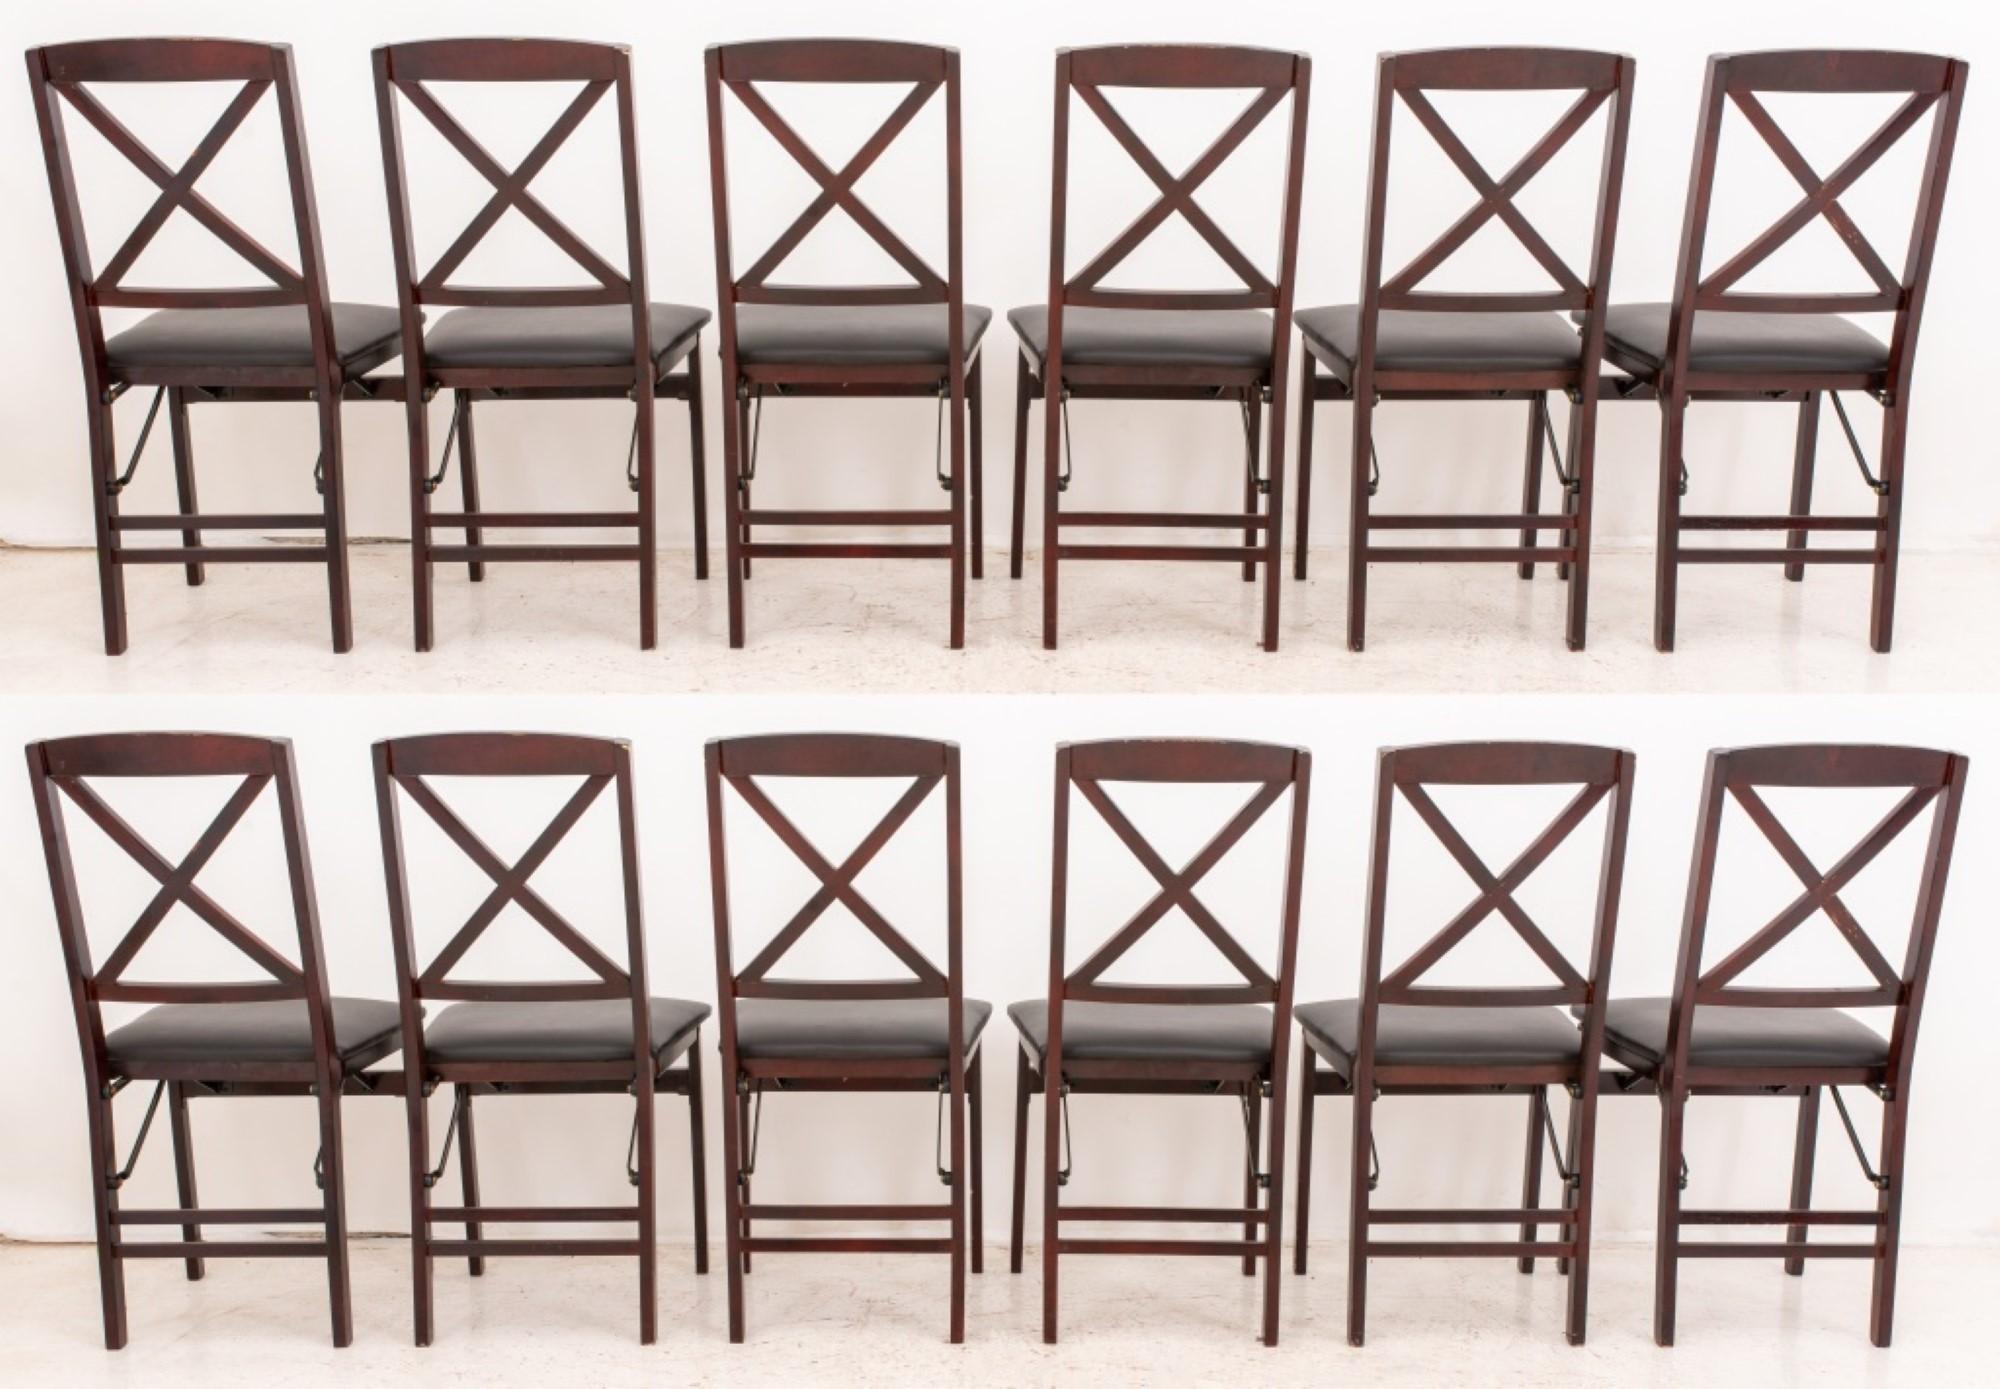 The Neoclassical group of twelve mahogany folding chairs has the following dimensions:

Height: 35 inches
Width: 17 inches
Depth: 19 inches
Seat Height: 18 inches